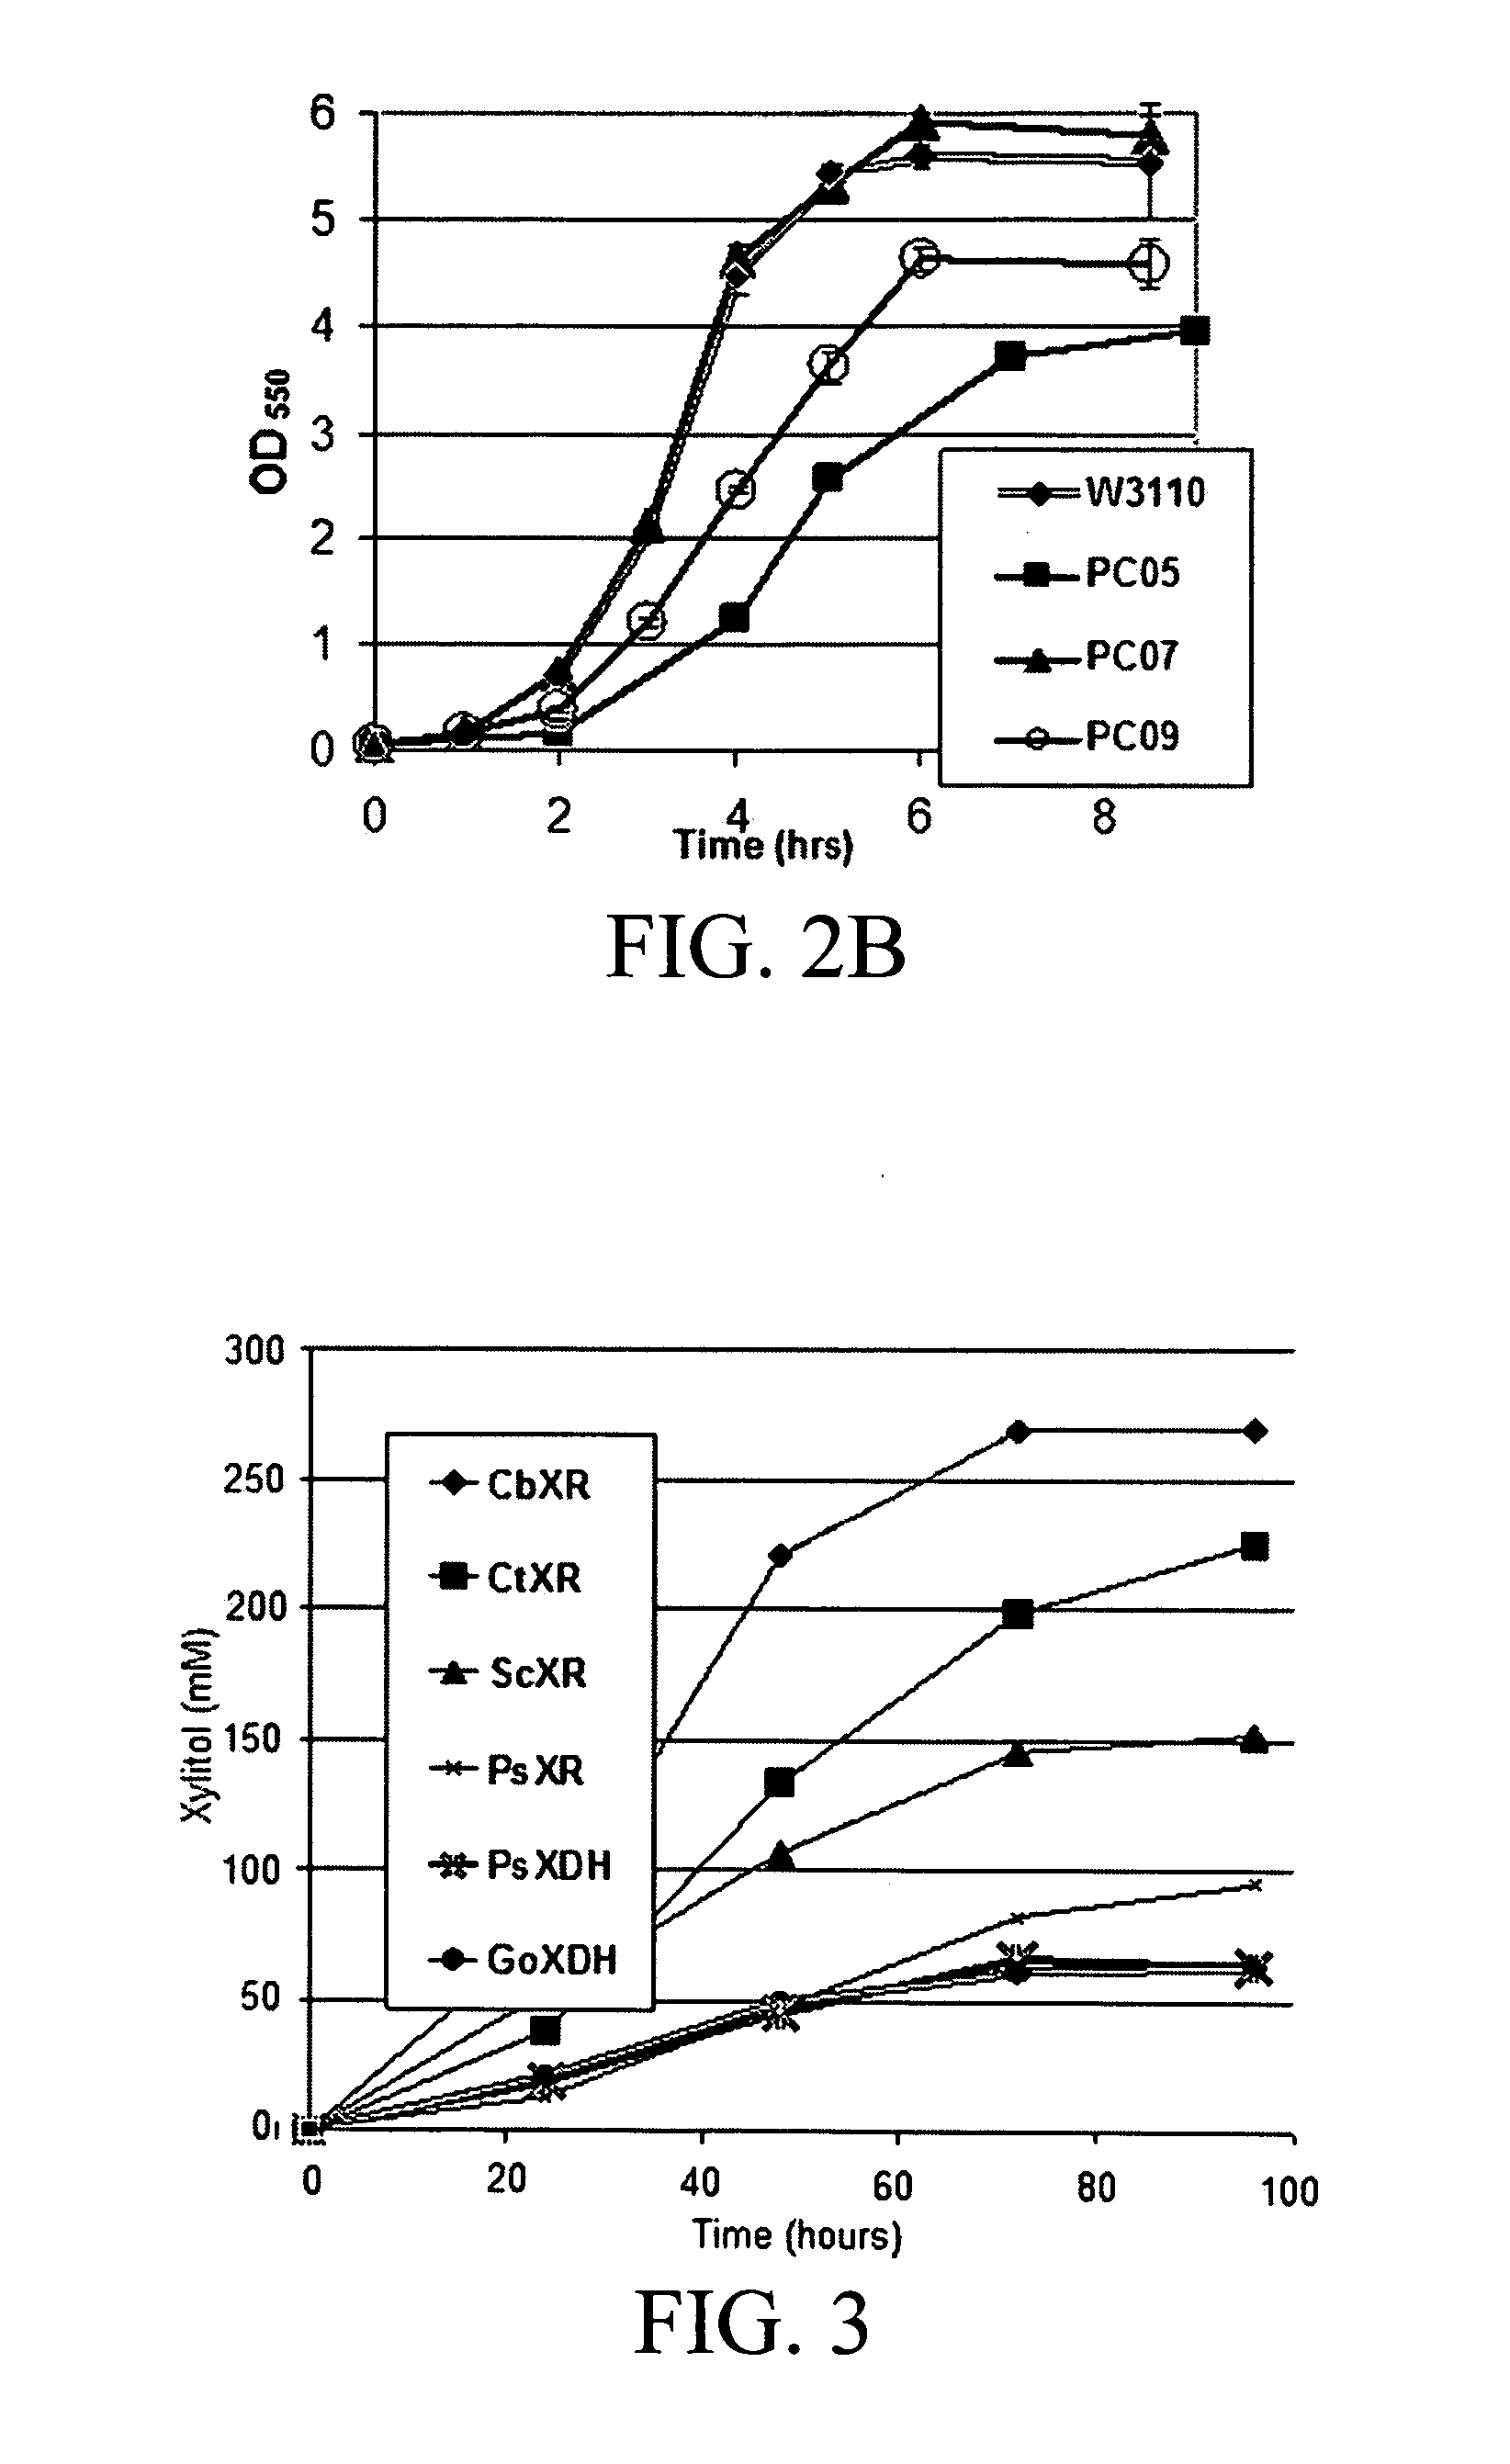 Materials and methods for the efficient production of xylitol